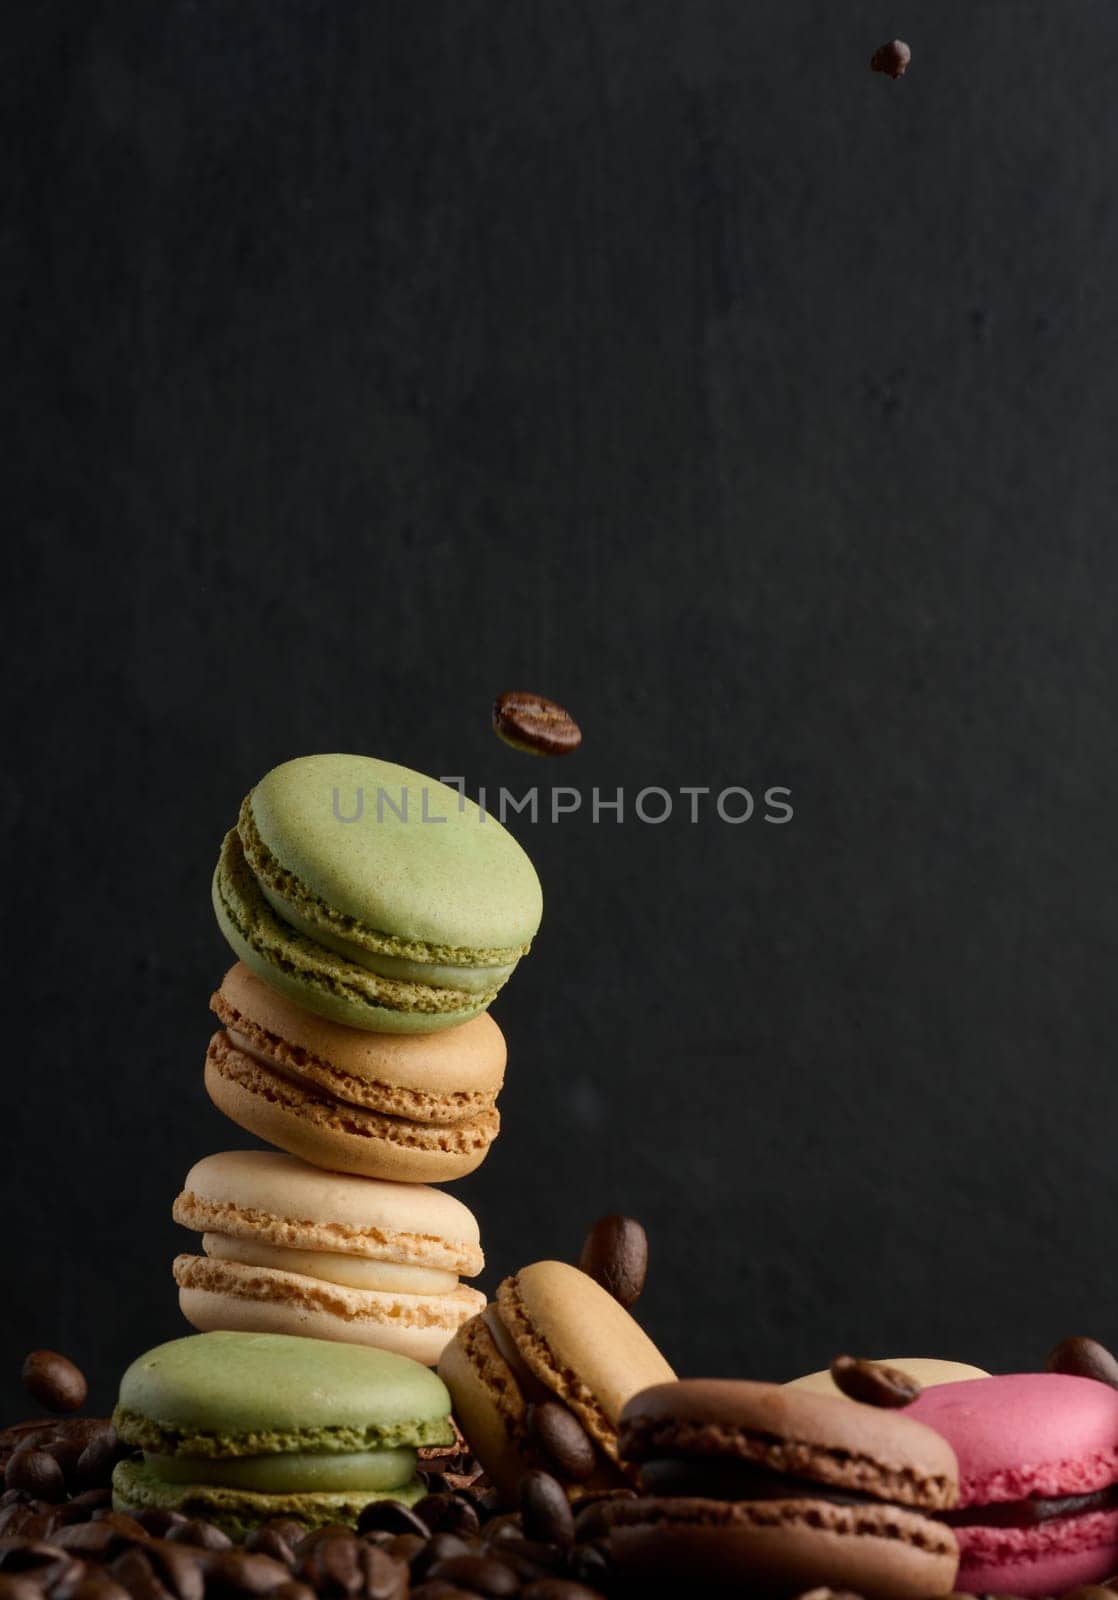 Stack of multi-colored macarons on a background of coffee beans, black background by ndanko